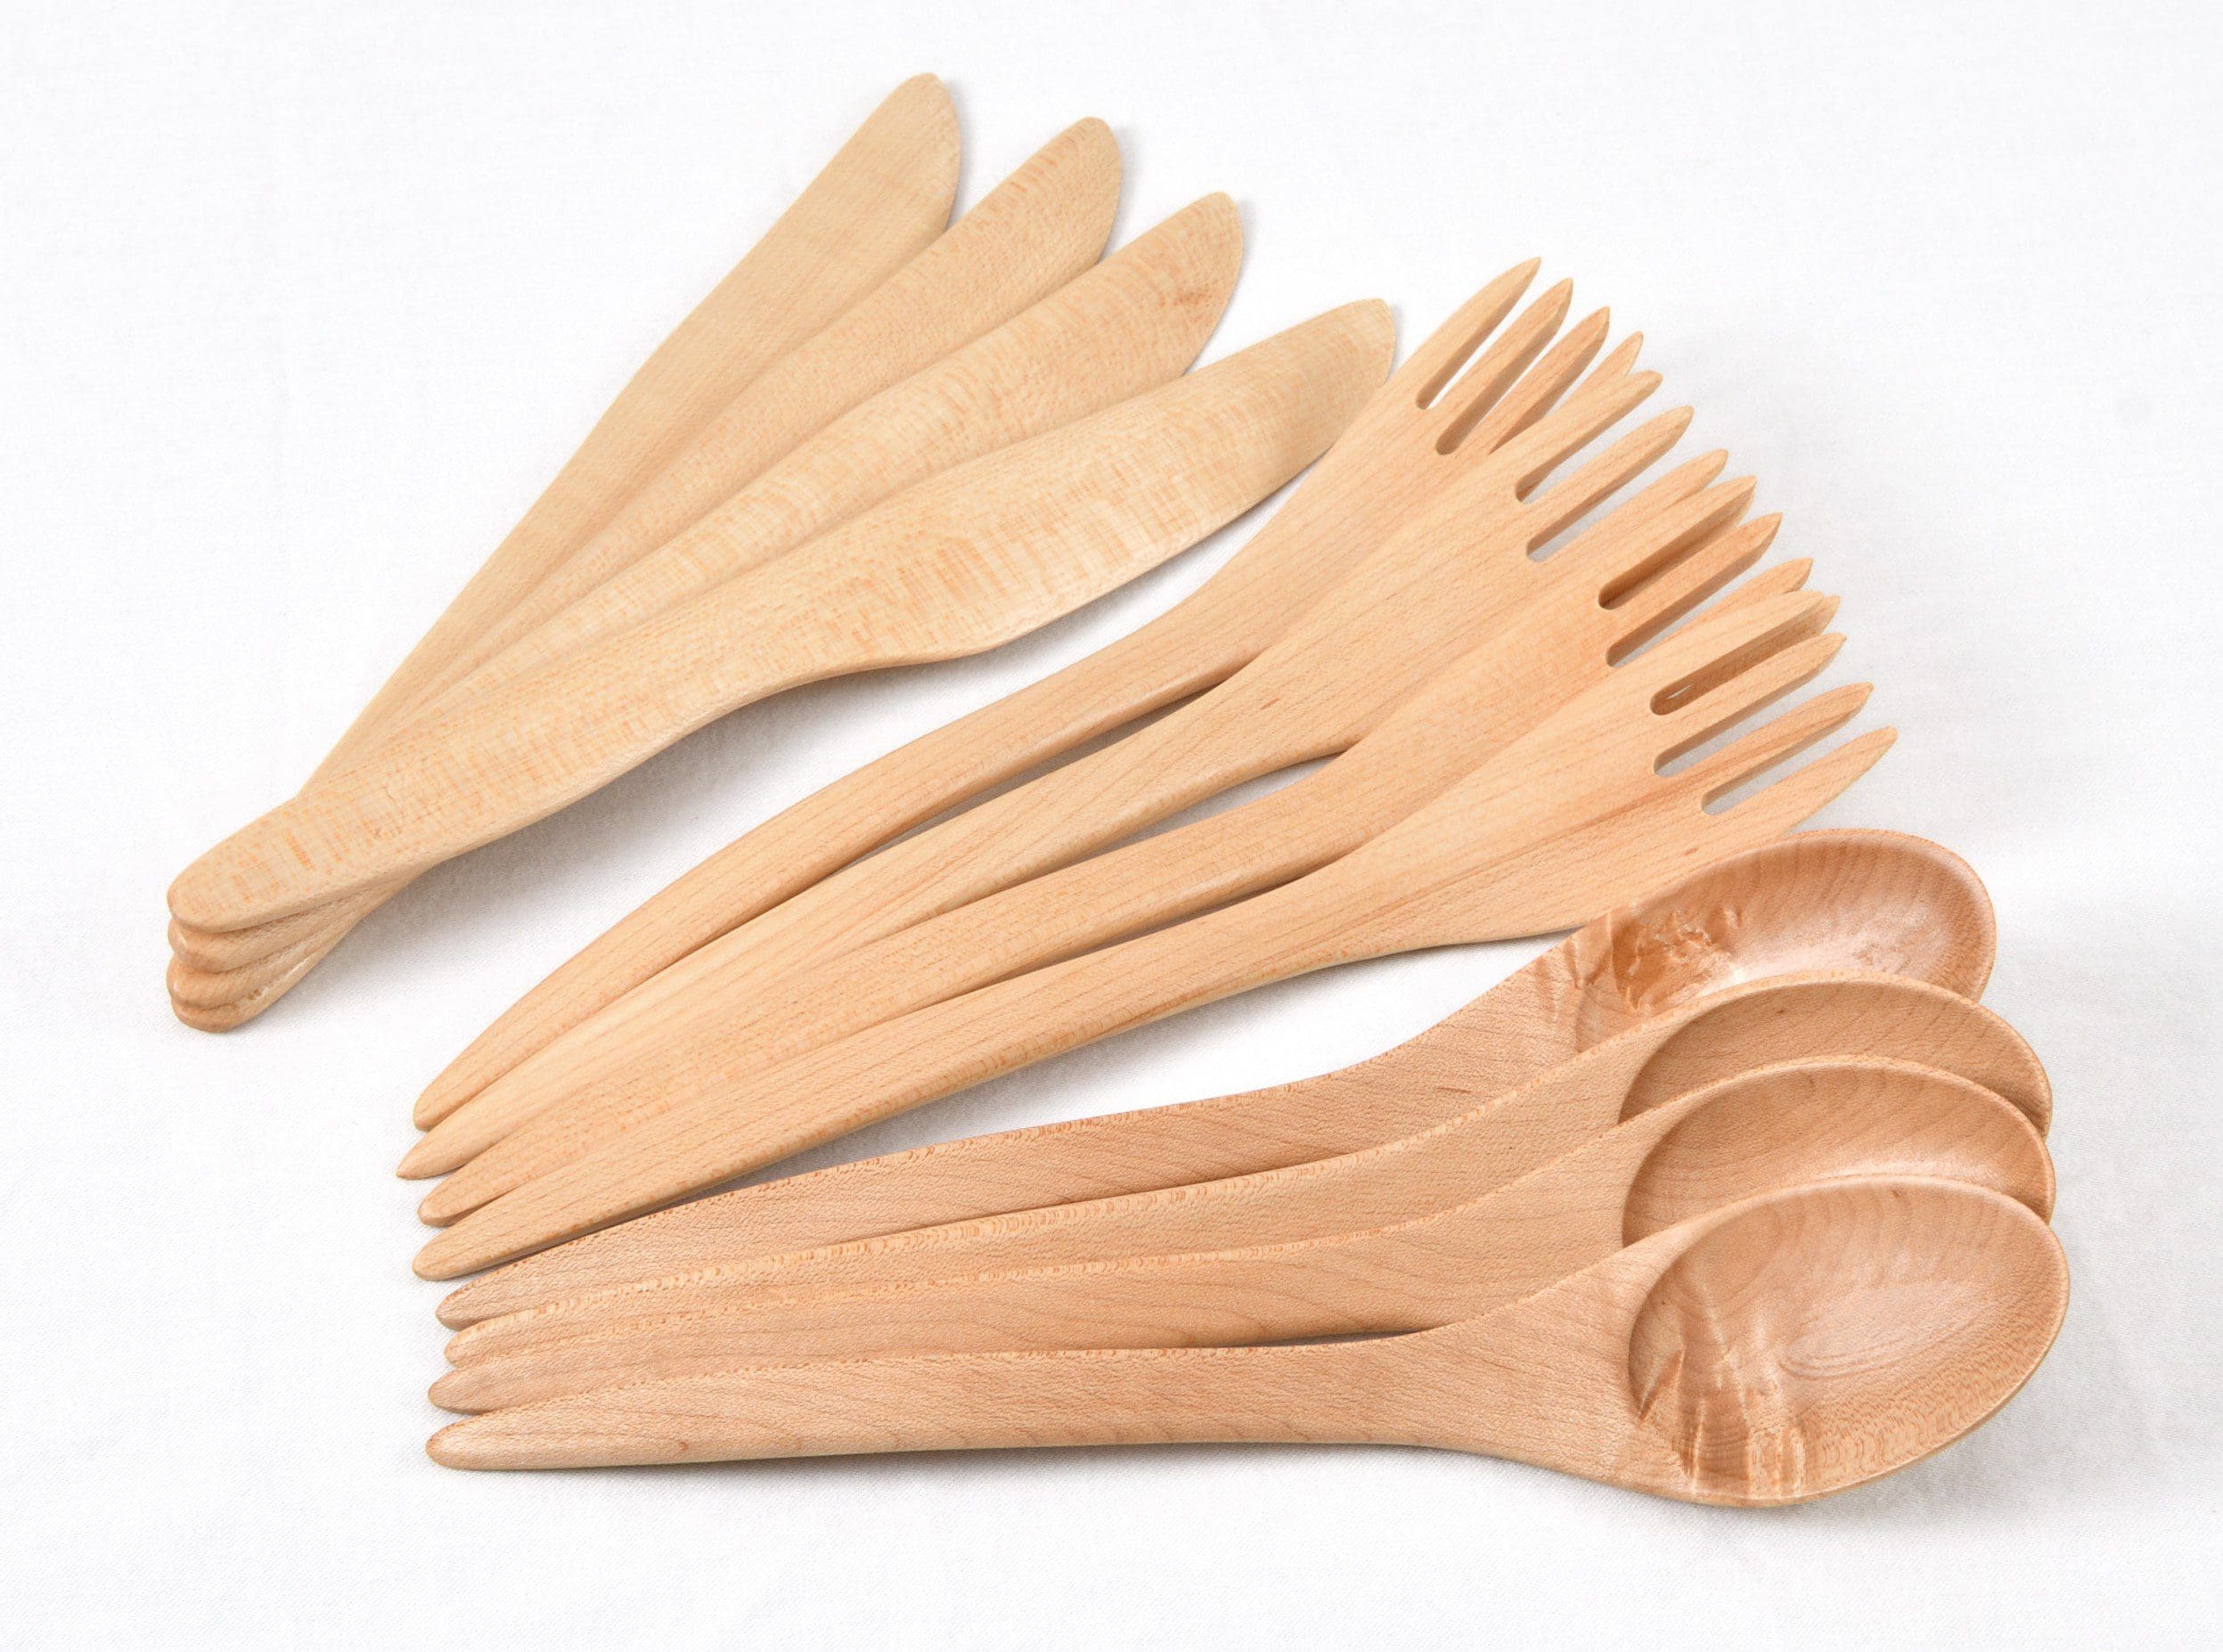 4 SETS of Maple Wood Cutlery